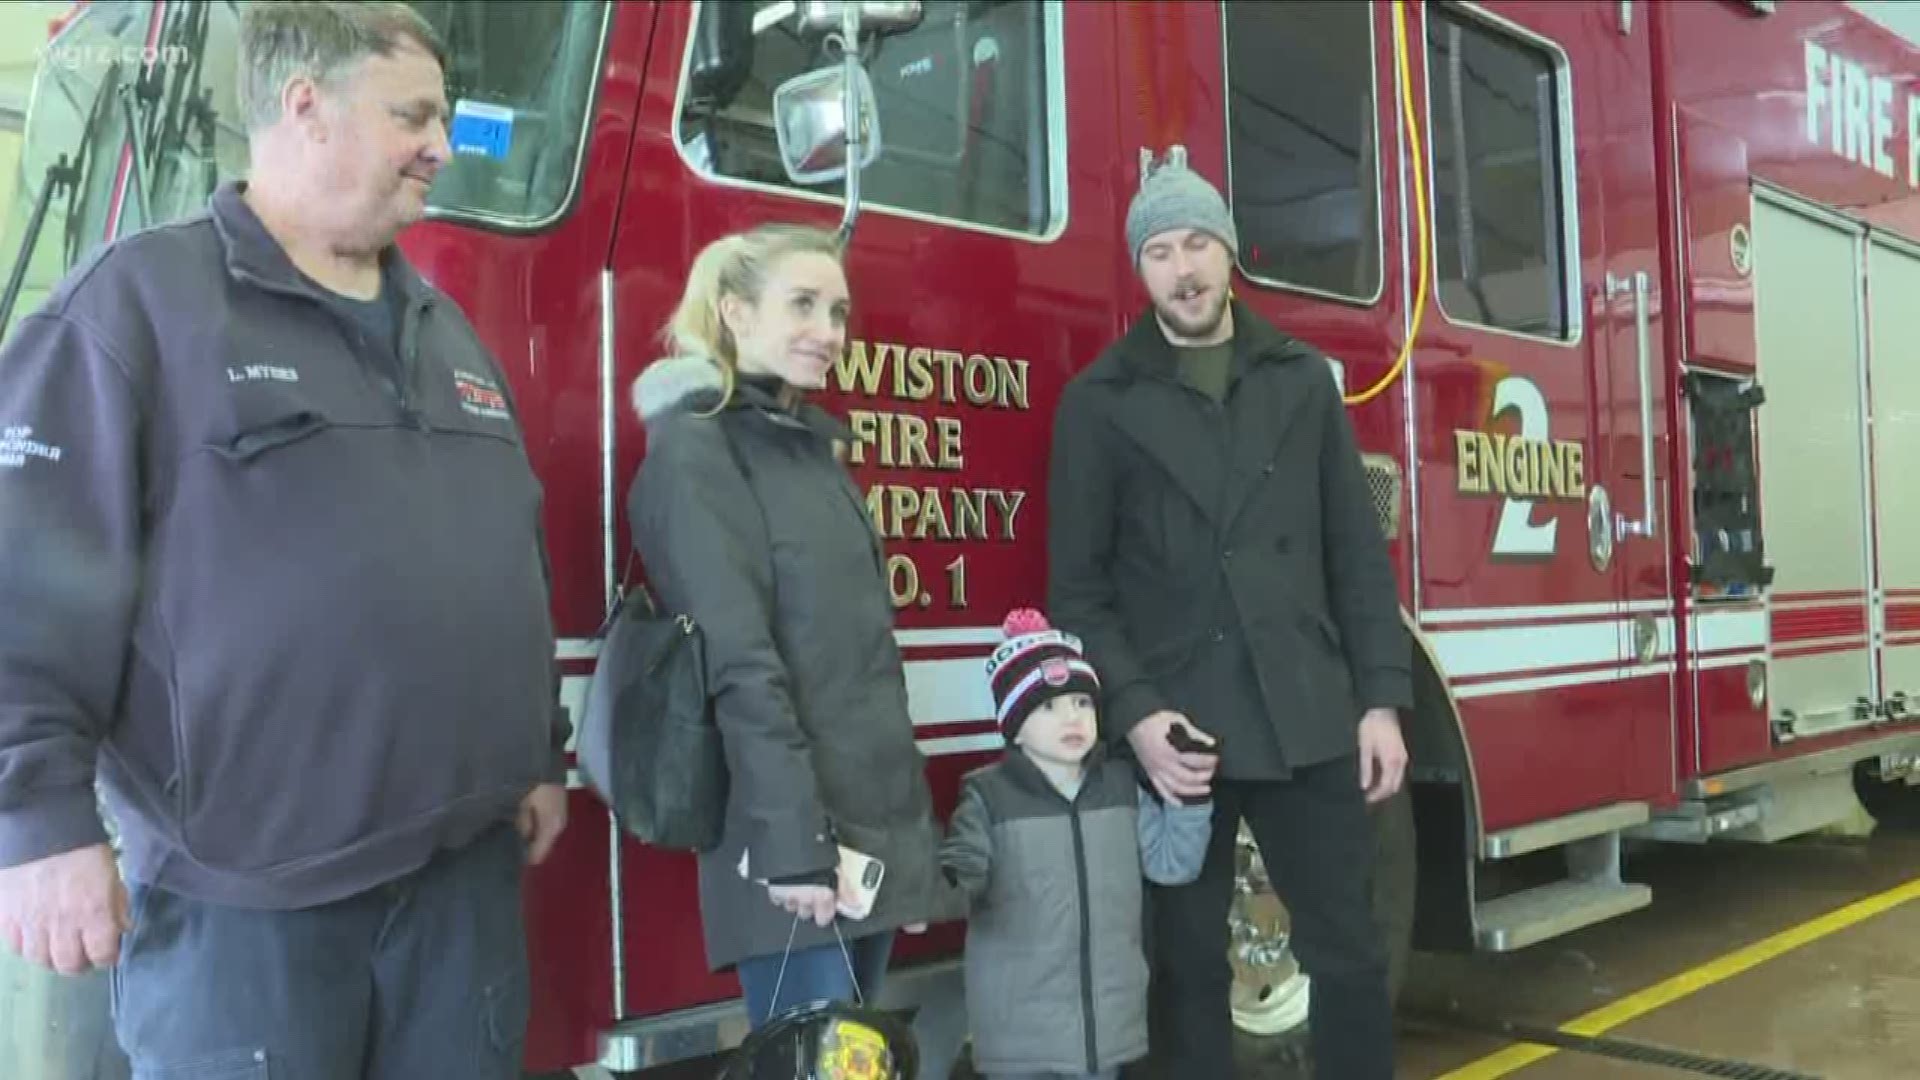 The ordeal touched a little 4-year-old boy named Carson. Today, he wanted to thank firefighters and police officers.